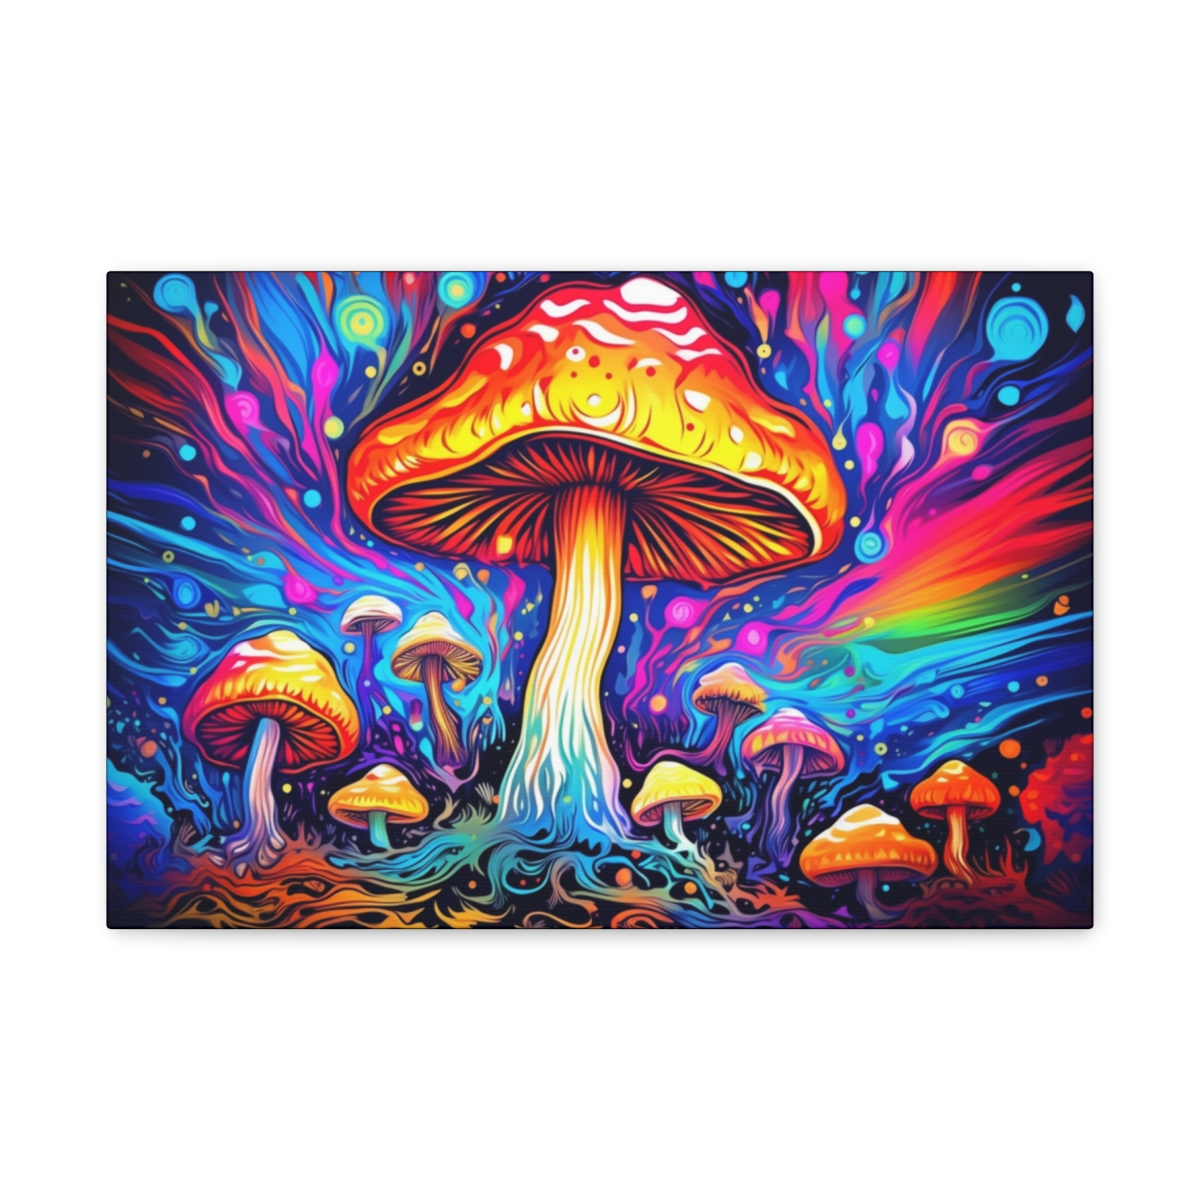 Psychedelic Mushroom Meditation Art Canvas Print: Into The New Realm